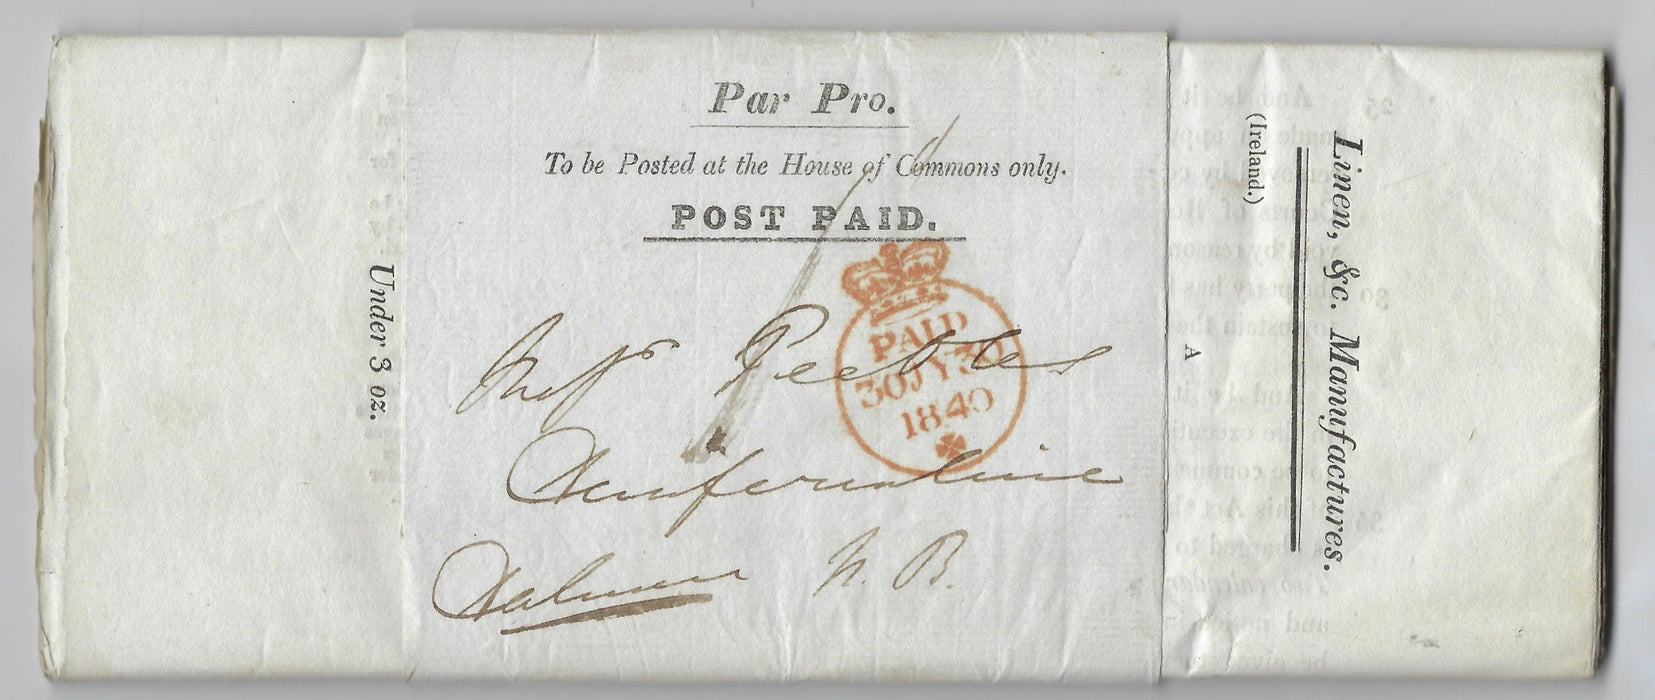 Great Britain 1840 "POST PAID" House of Commons wrapper.